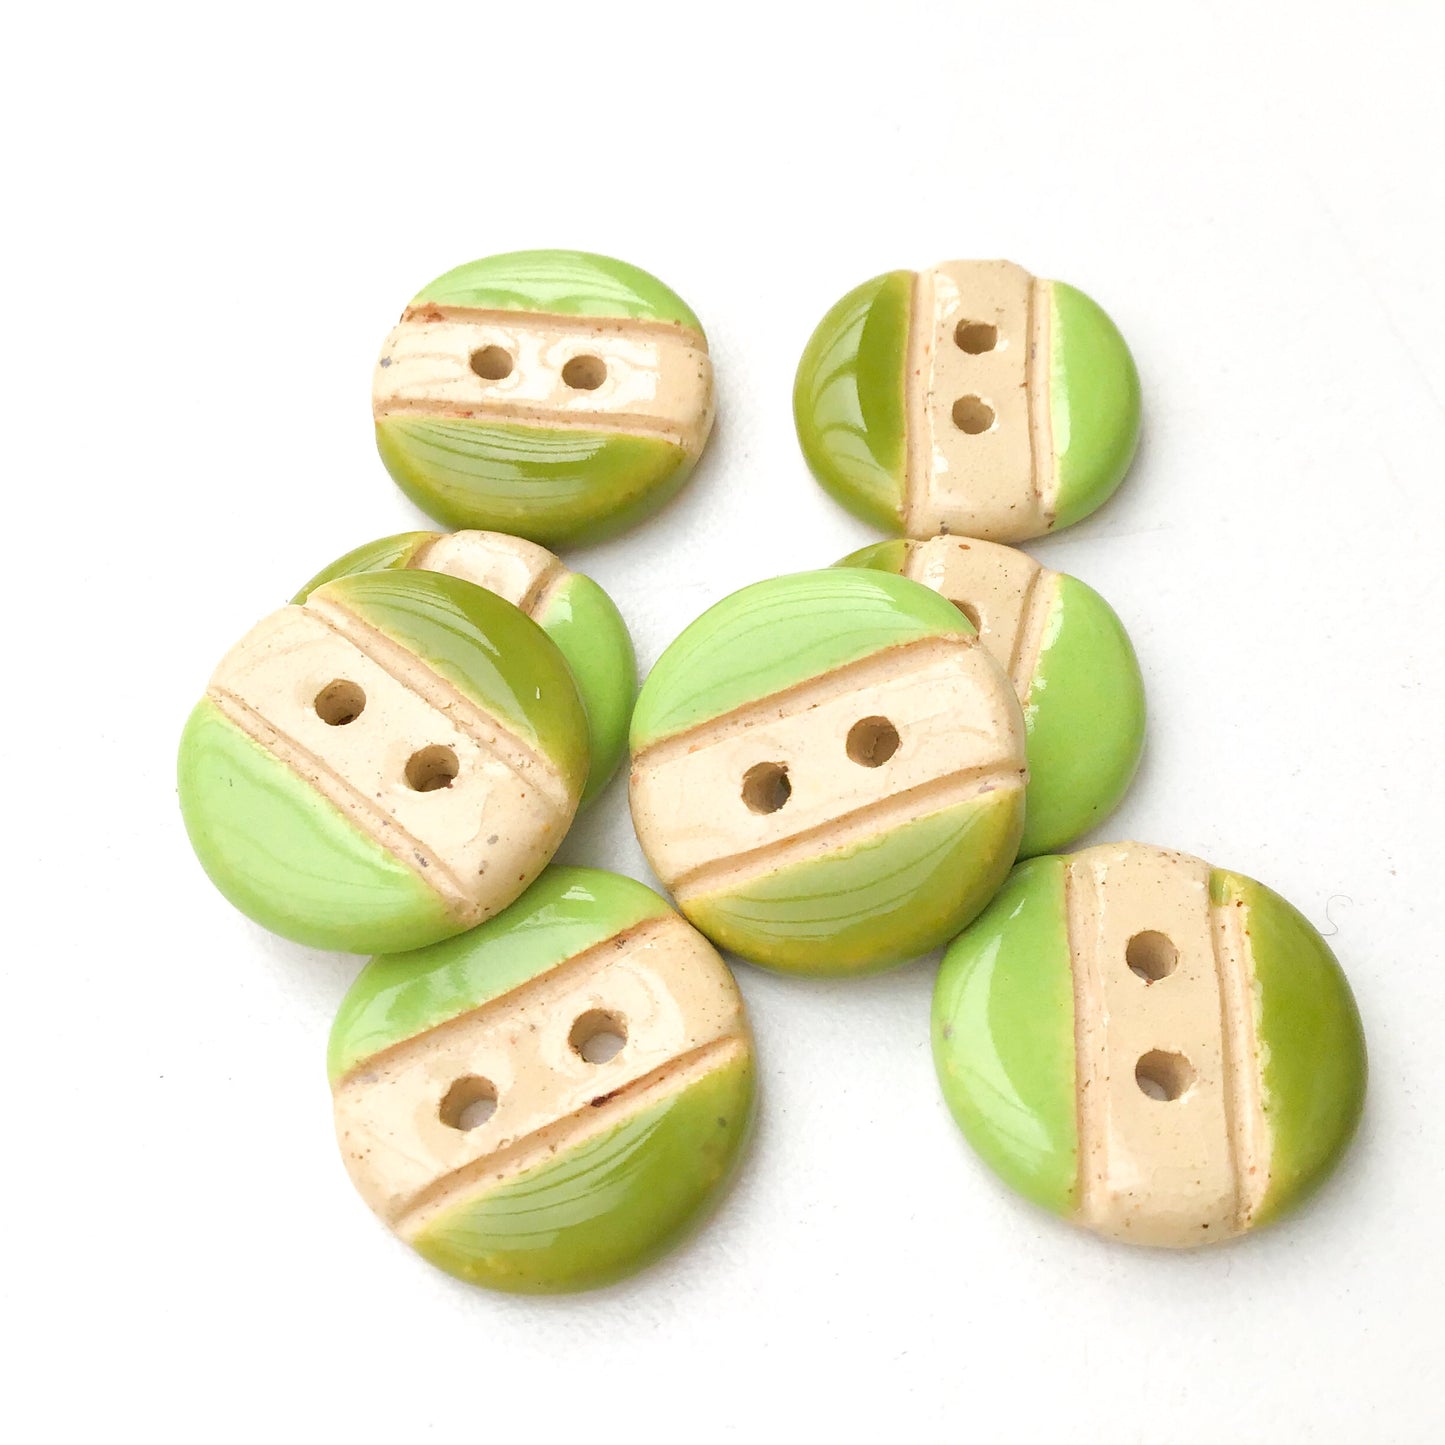 Olive & Lime Green Ceramic Buttons on Buff Clay - Round Ceramic Buttons - 11/16" - 8 Pack (ws-134)